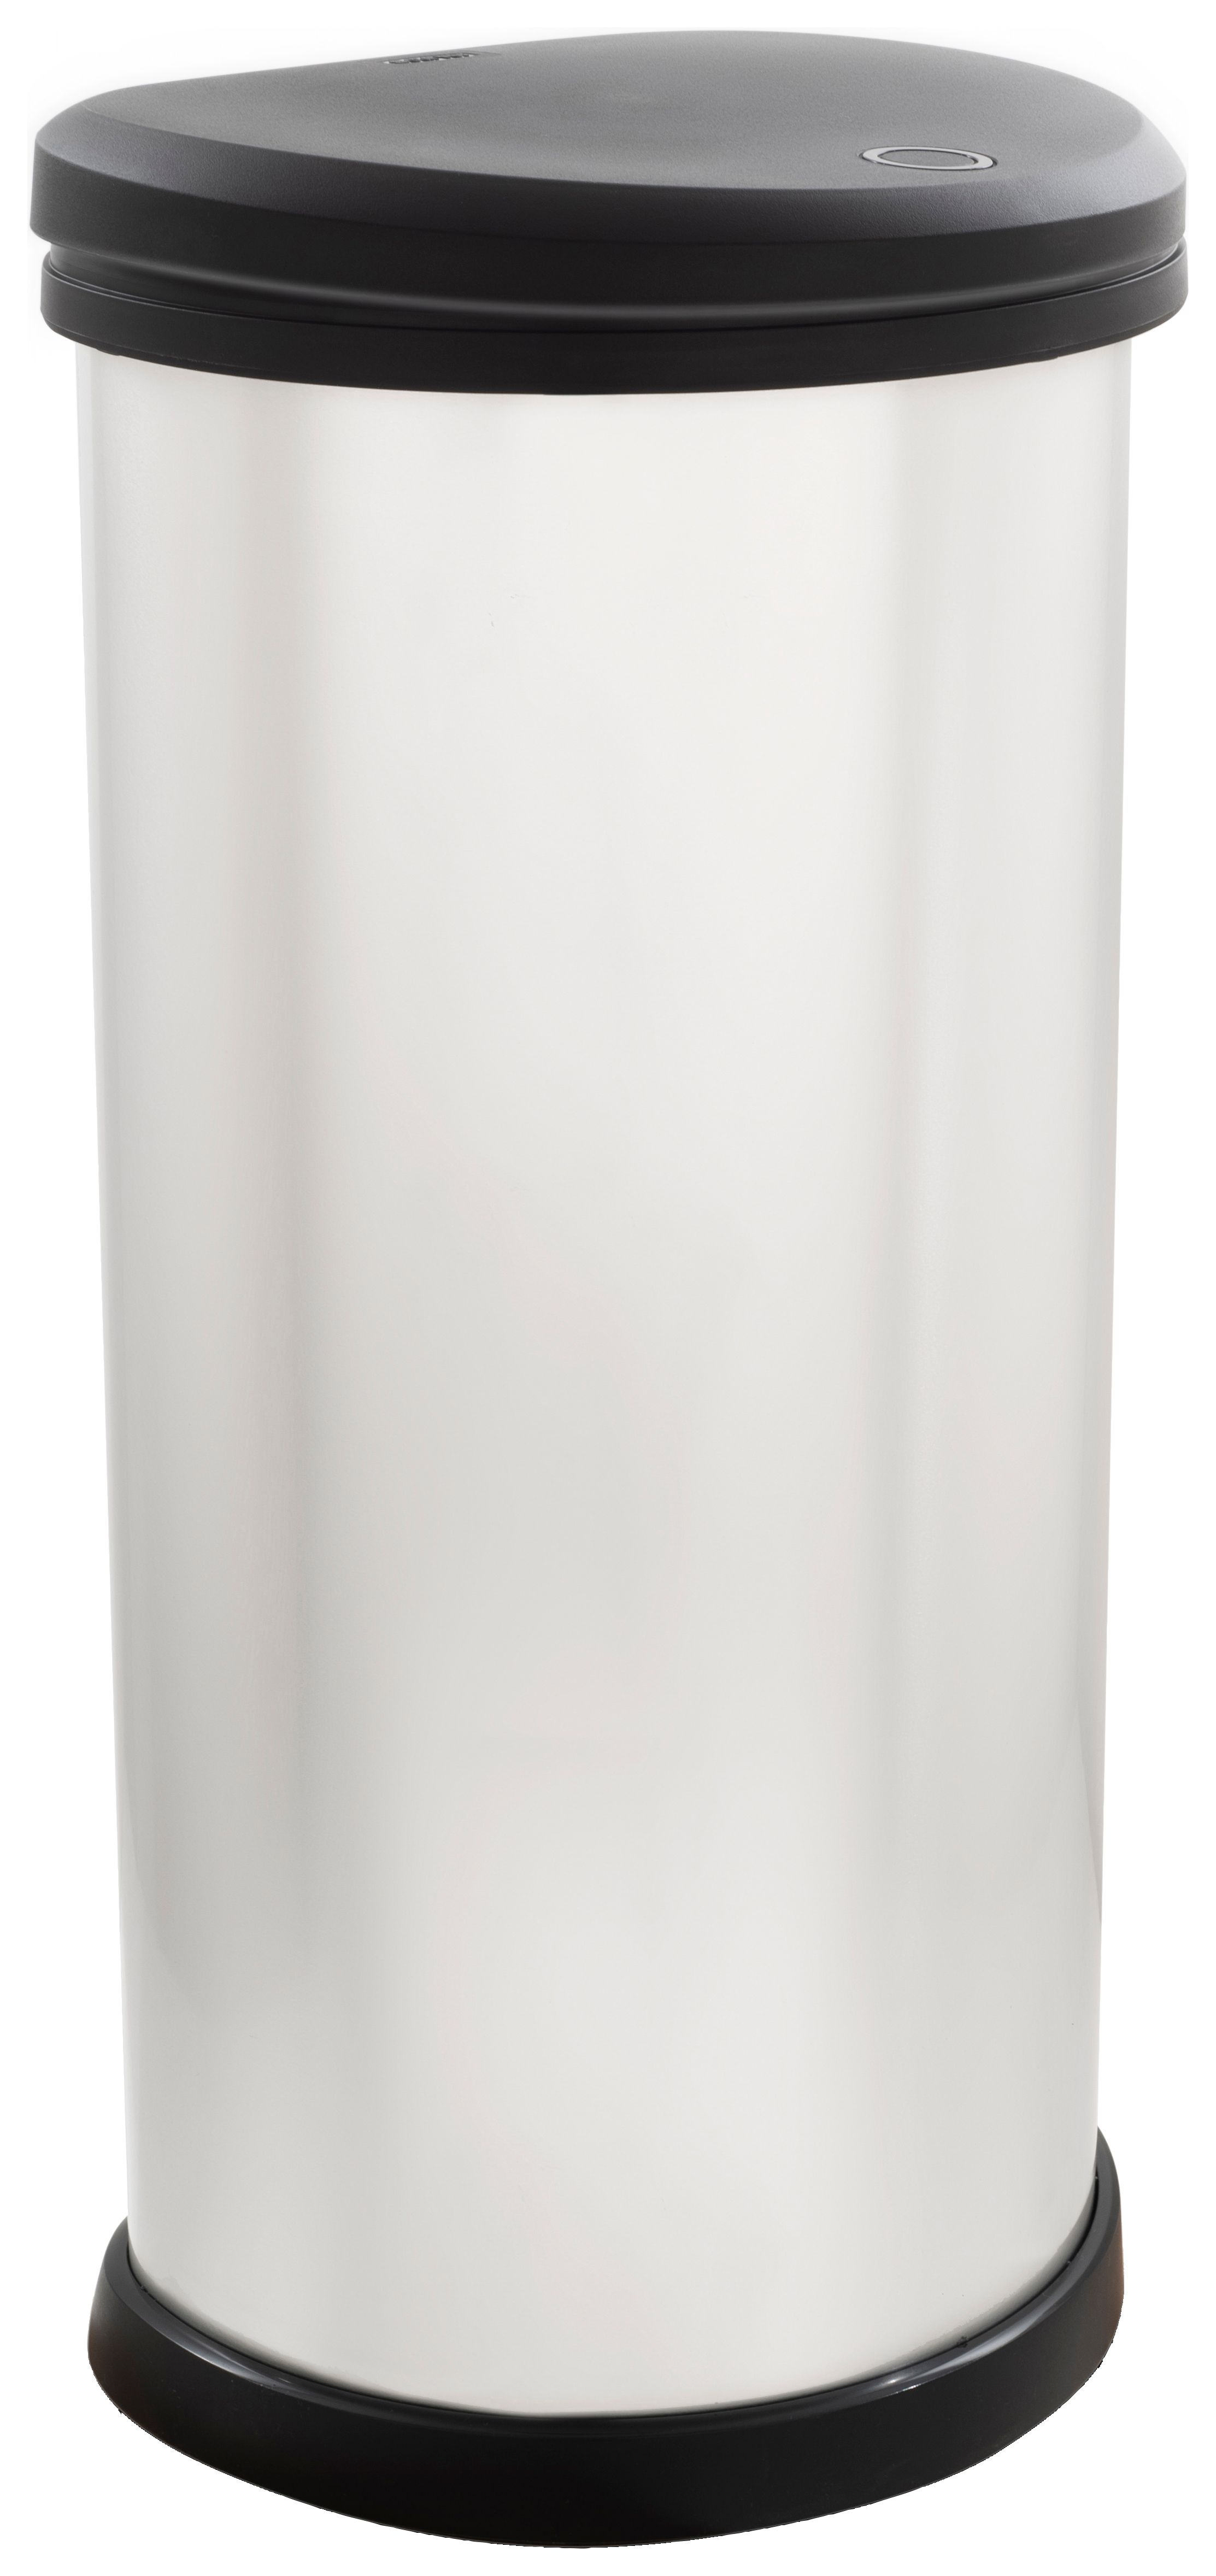 Image of Curver Metal Effect Touch Top Deco Bin, Silver, 40 Litre